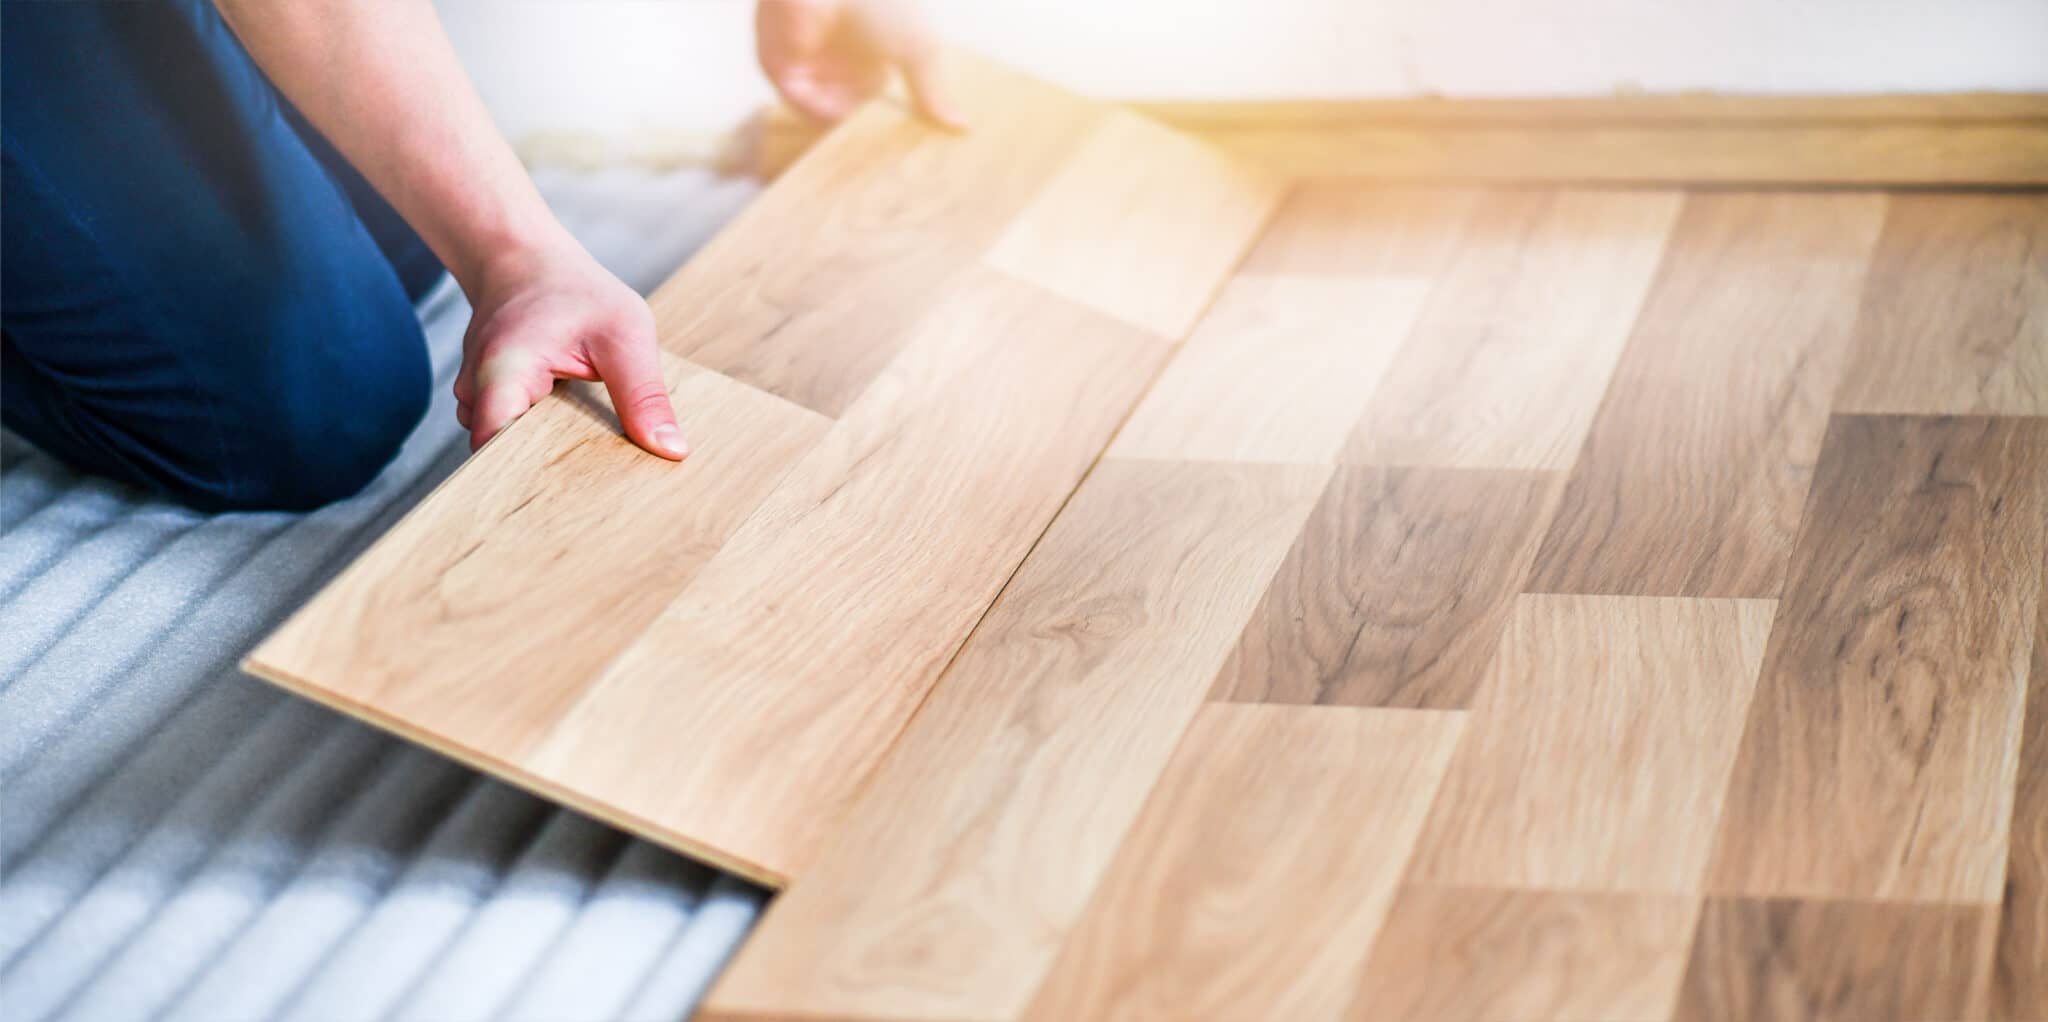 <strong><u>LAMINATE FLOORING: THE PROS AND CONS</u></strong>